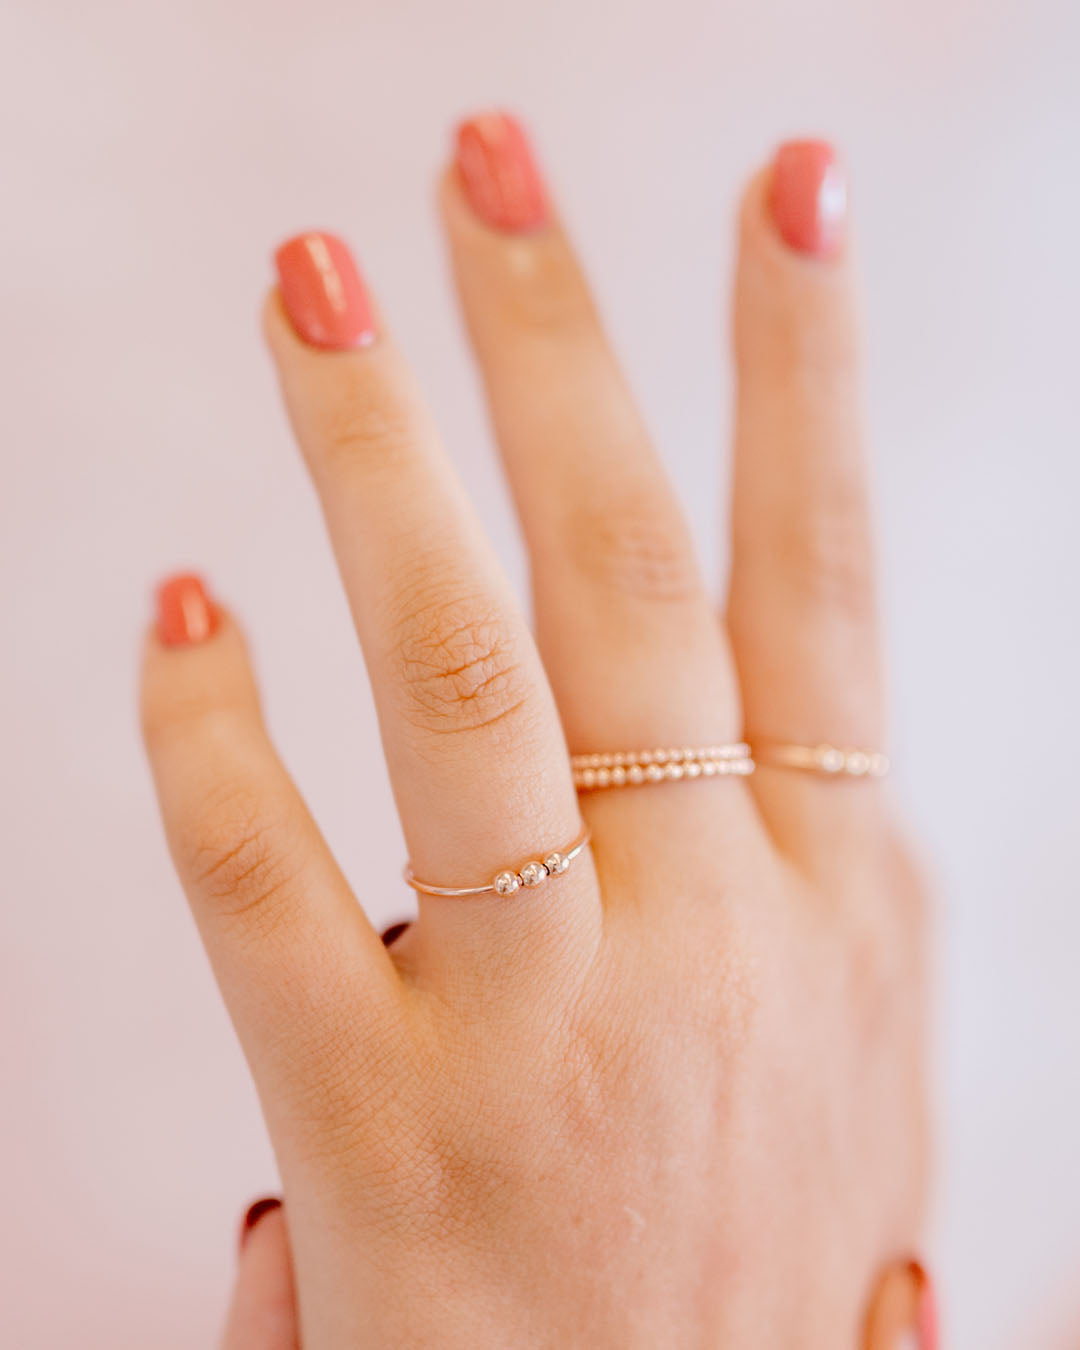 Abacus Bead Stacking Anxiety Ring - Favor Jewelry